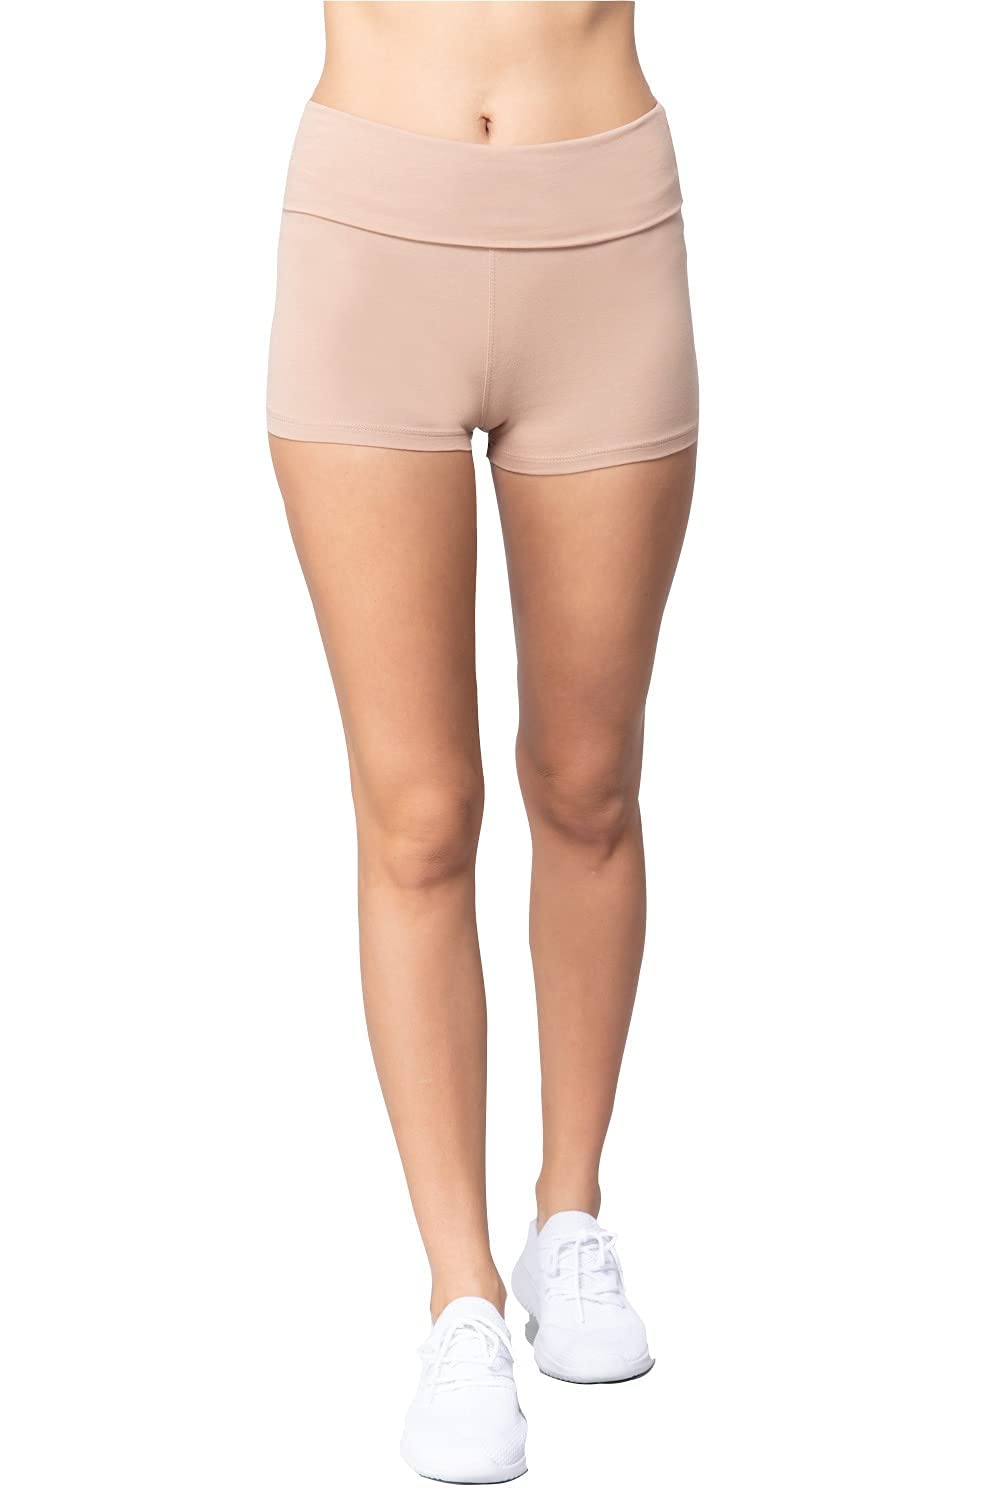 Made of 92% Cotton, 8% Spandex Non see-through, quick-dry, breathable Basic  design, essential workout yoga shorts for the daily life.The fitness shorts  can outline your curve, at the same time they will